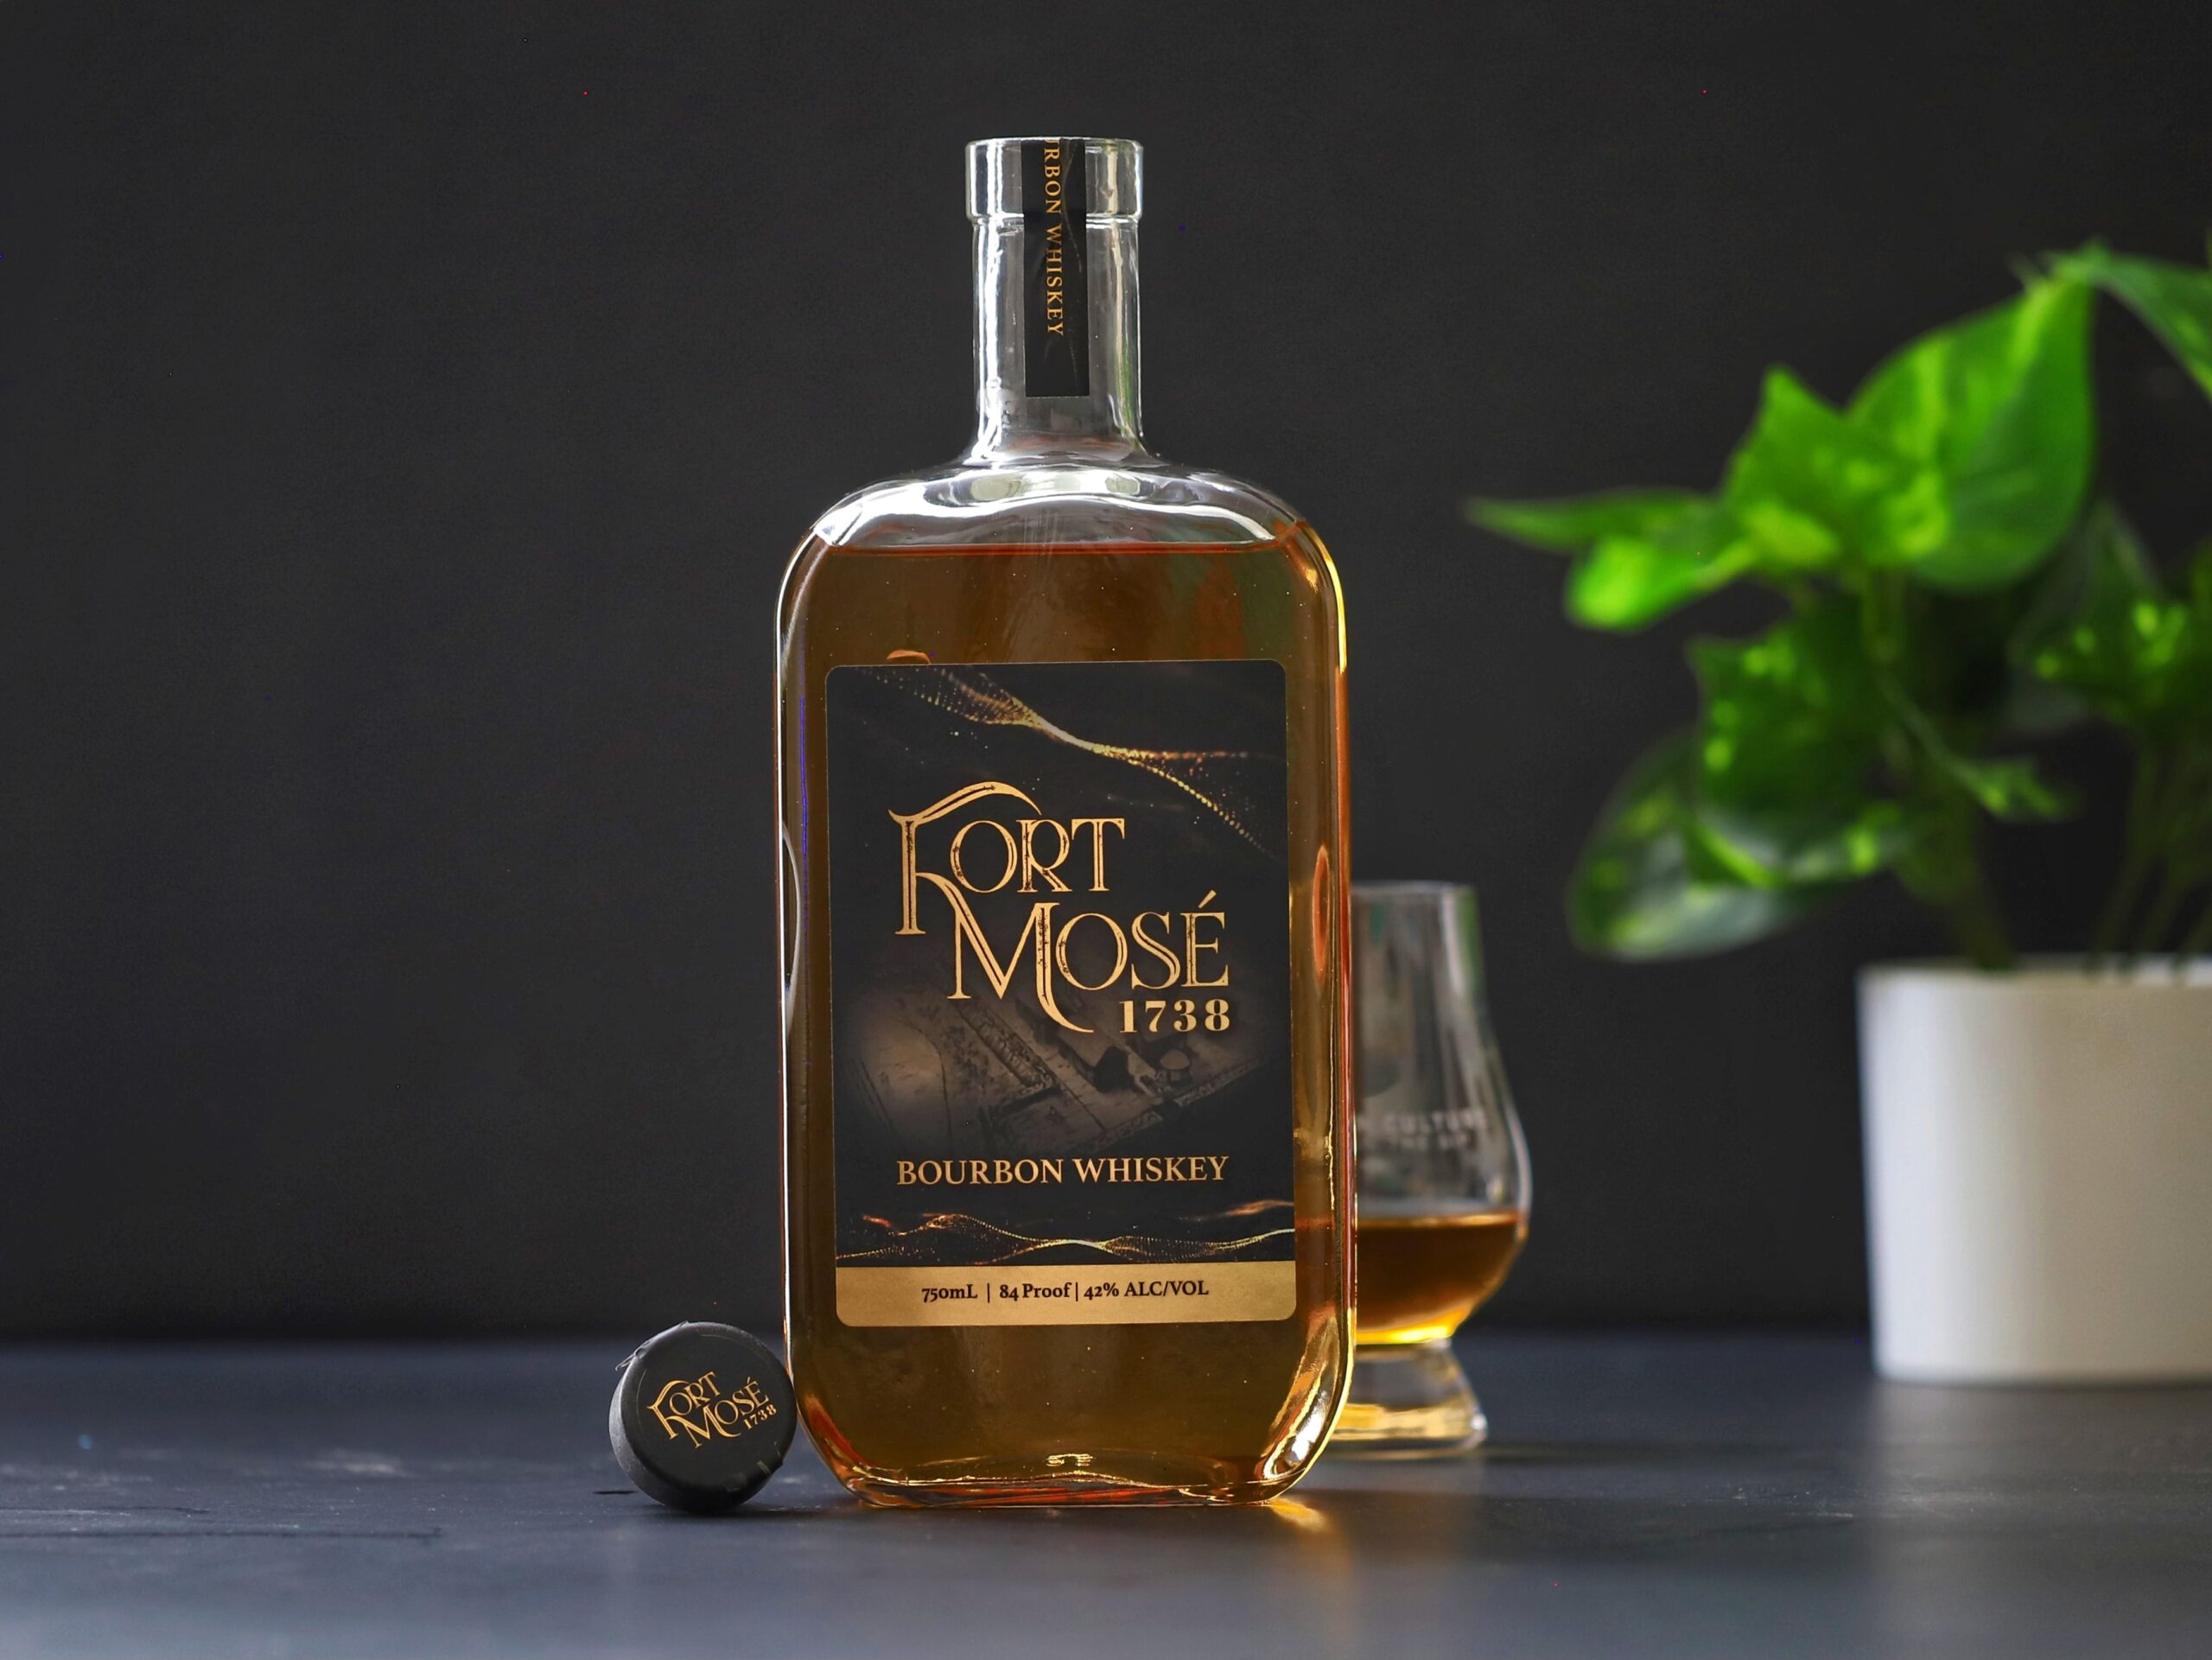 Fort Mosé 1738 Bourbon Whiskey Review